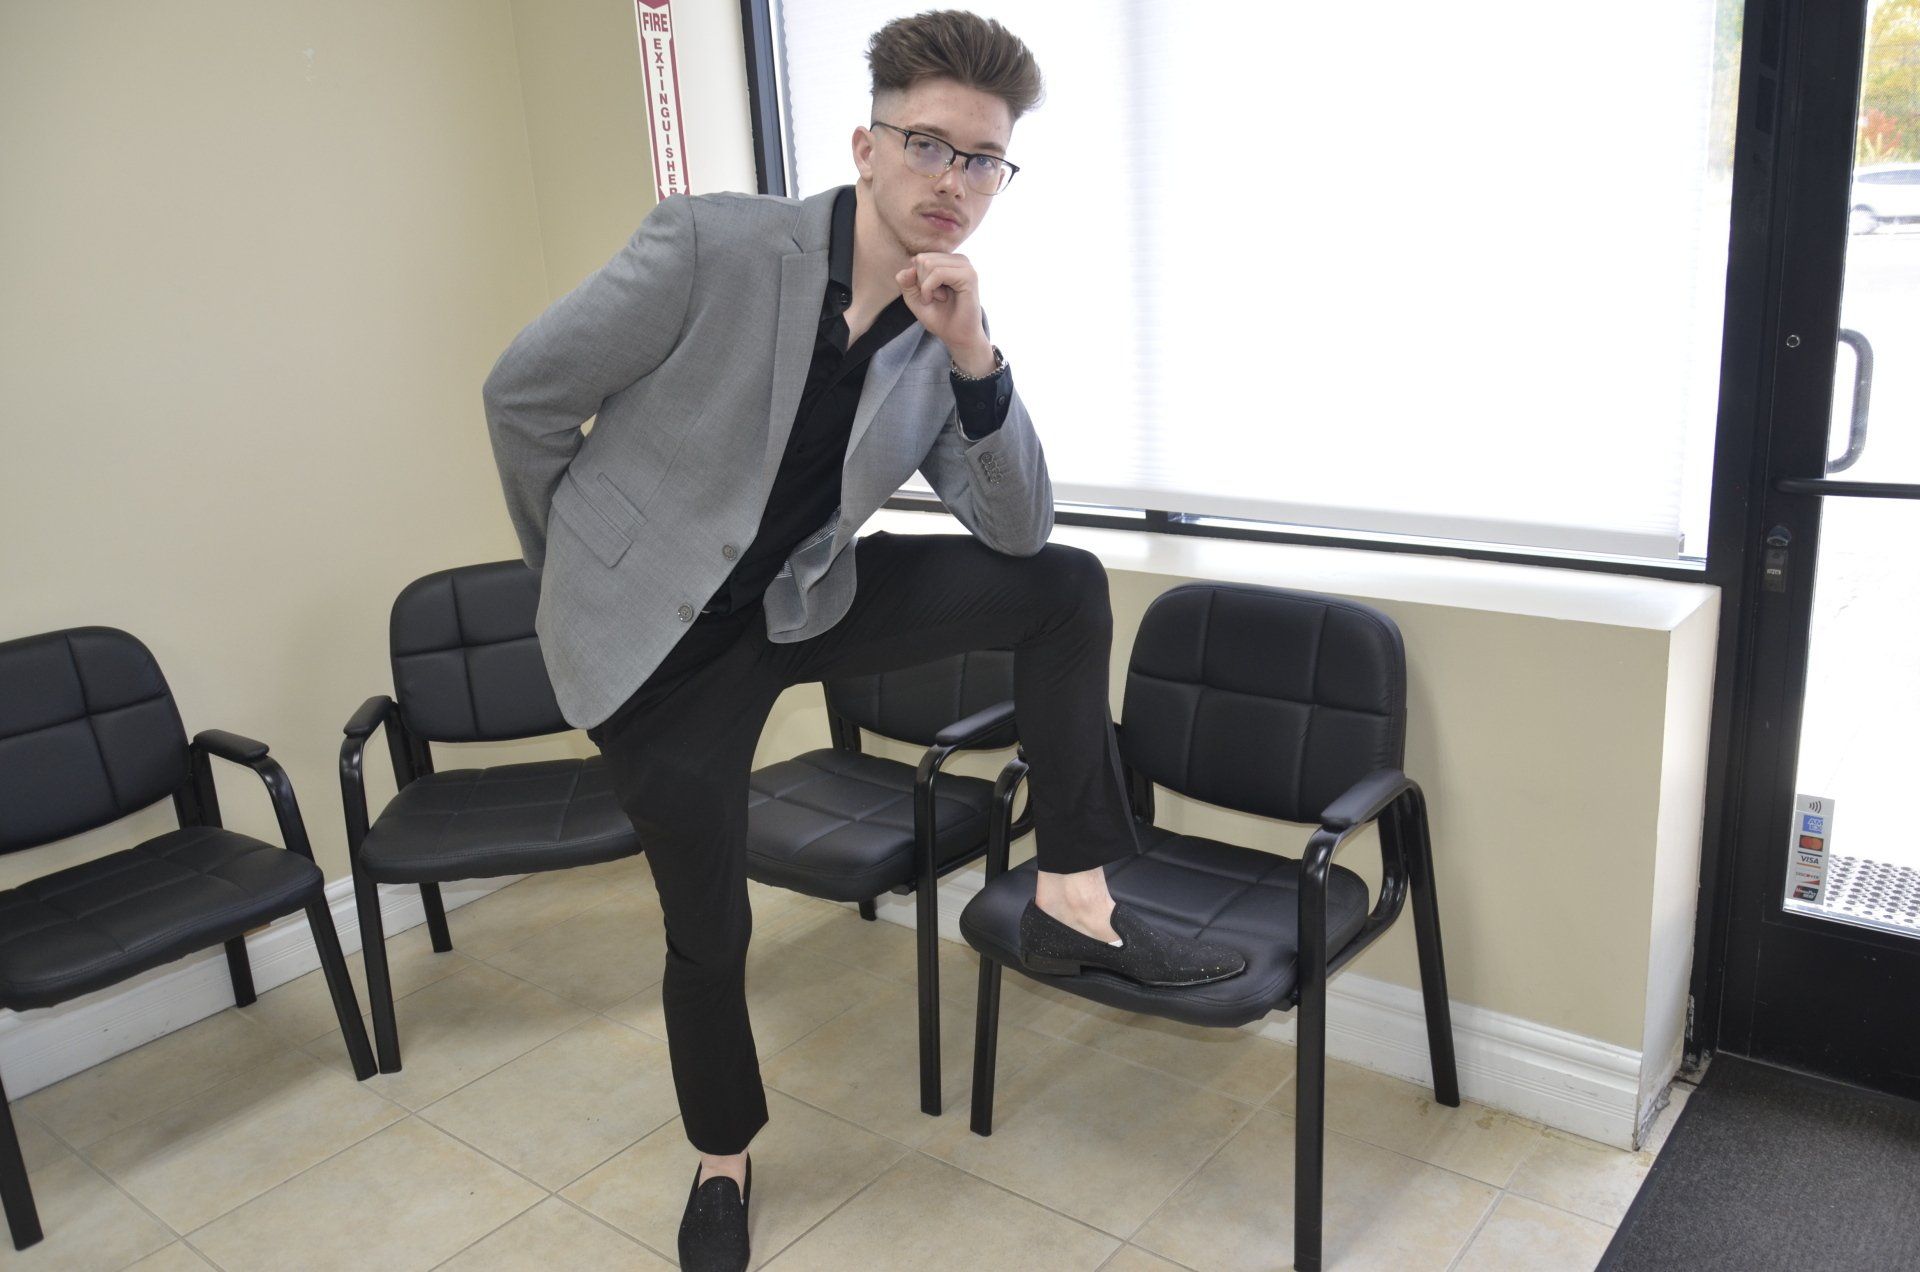 a man in a suit is standing on one leg in a waiting room .